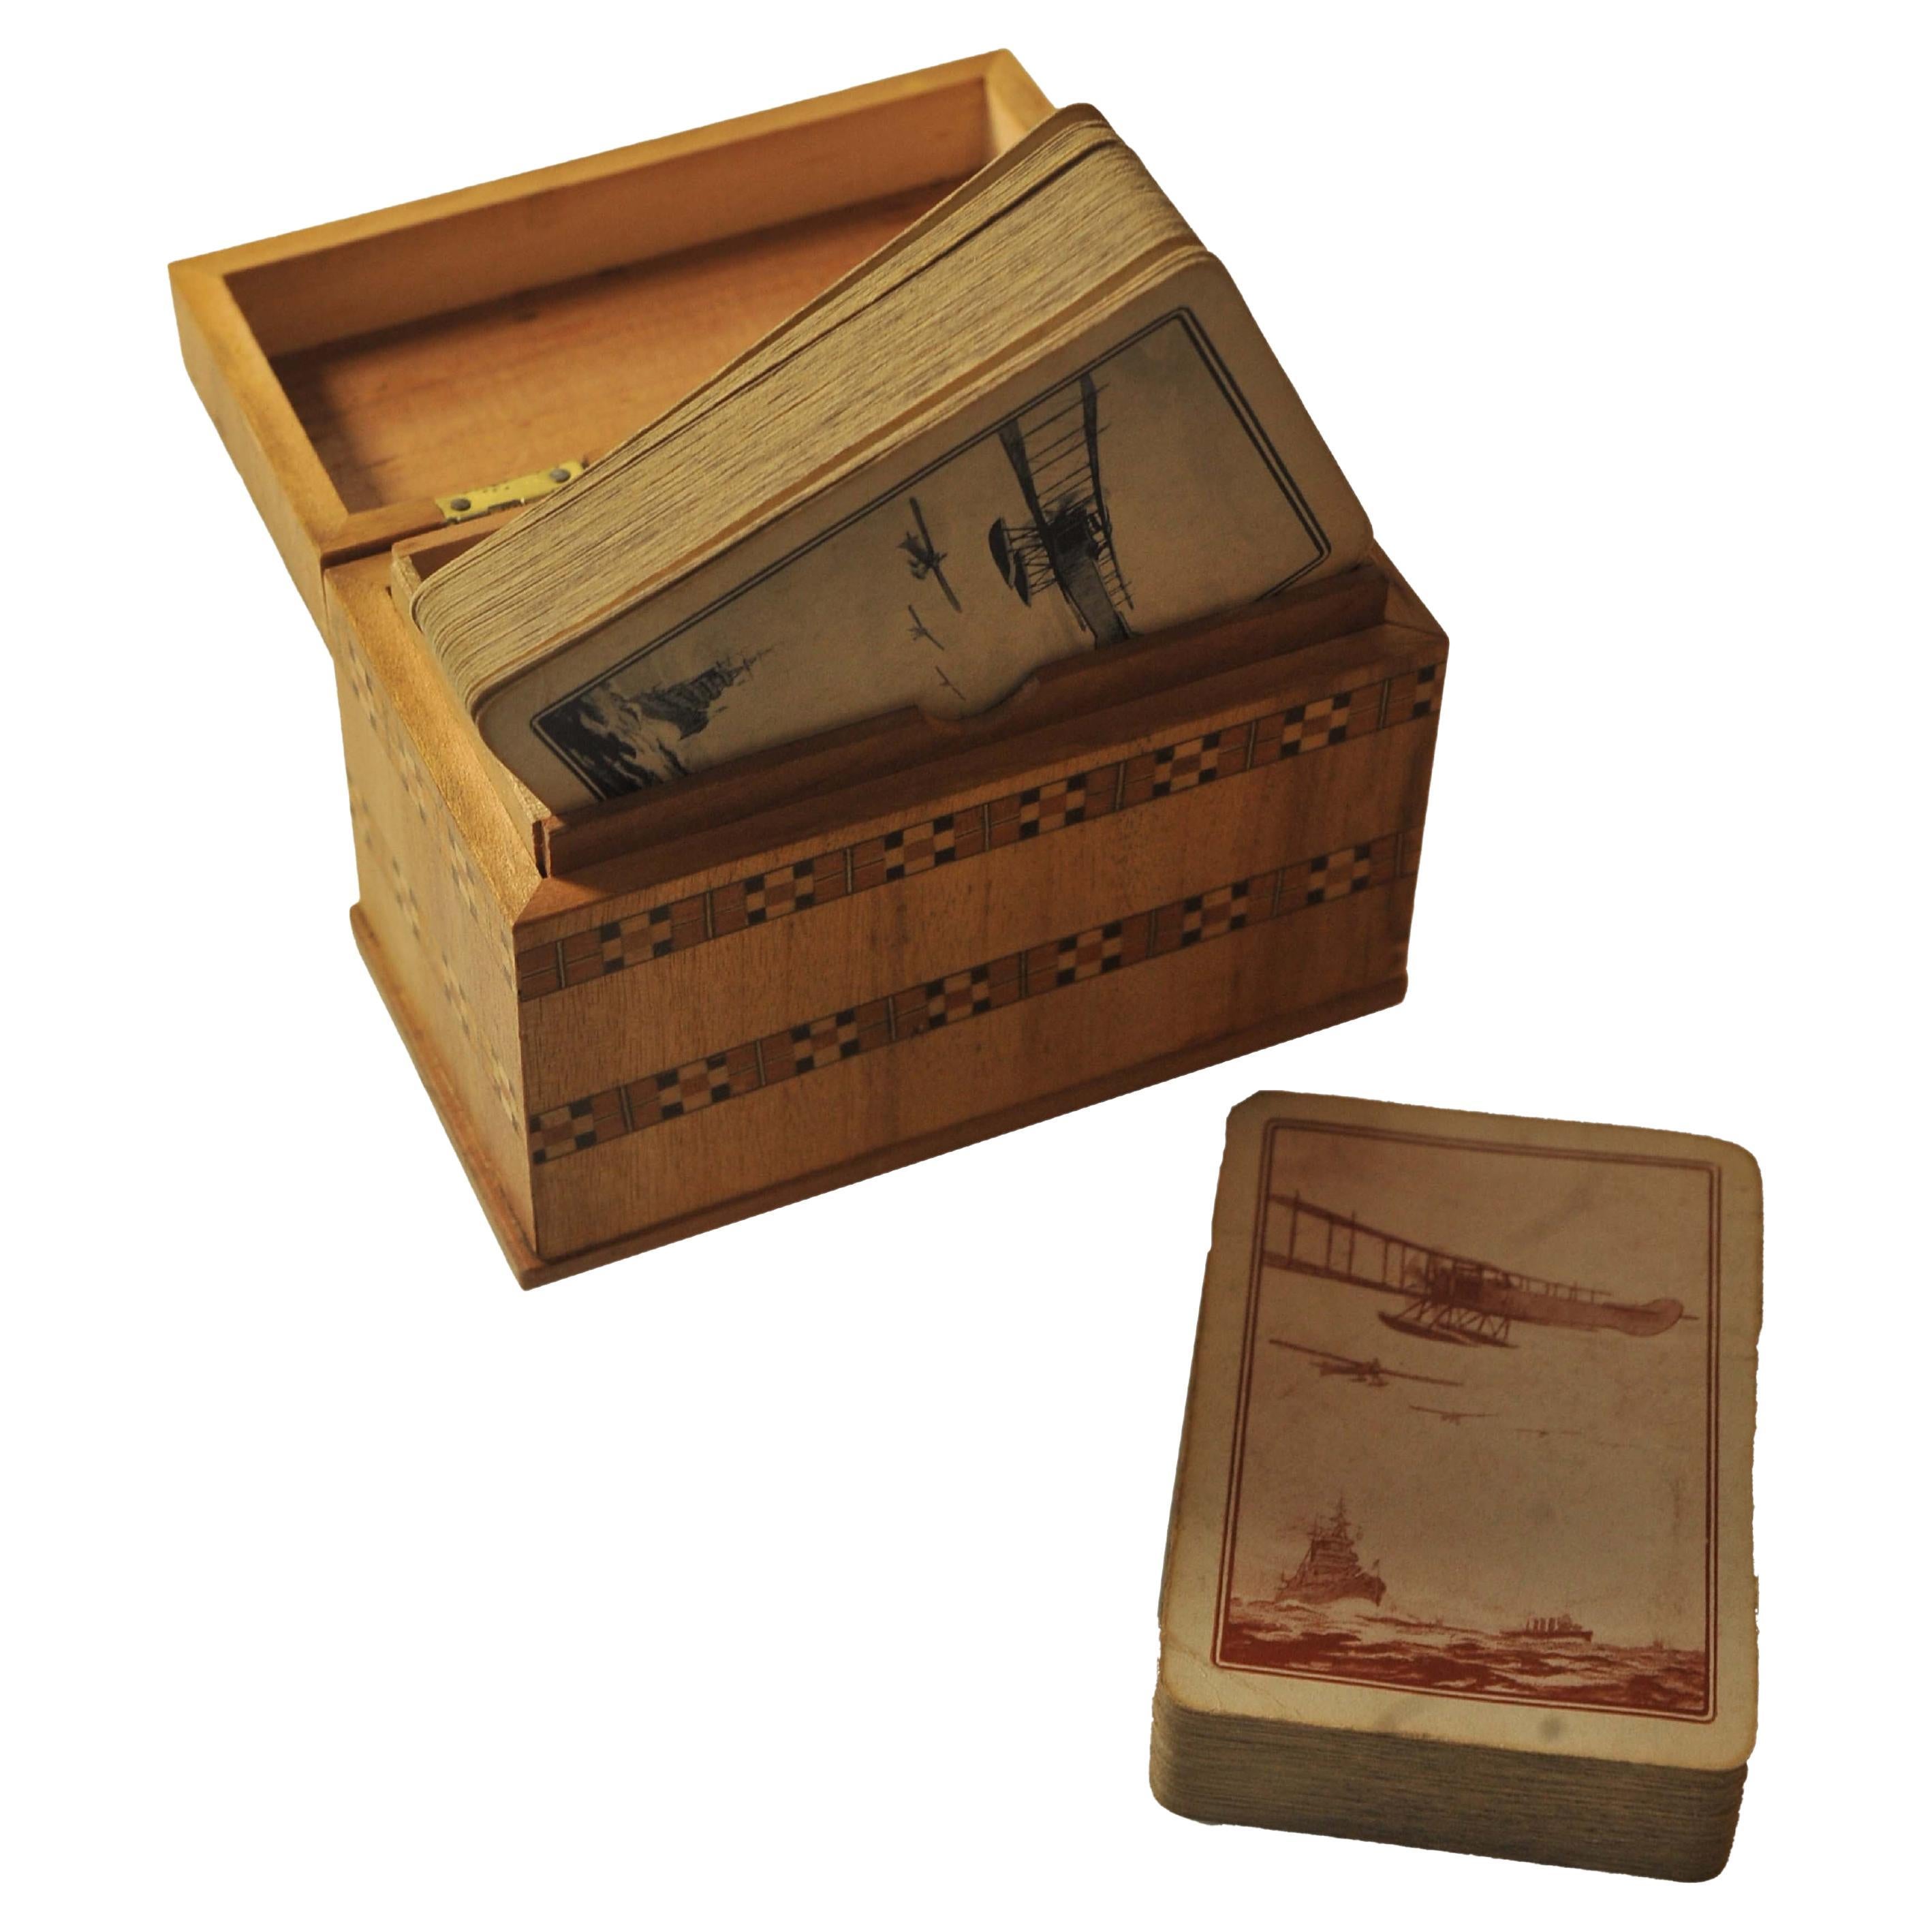 British A WW1 Set of Military Interest Playing Cards with Tunbridge Ware Card Box 